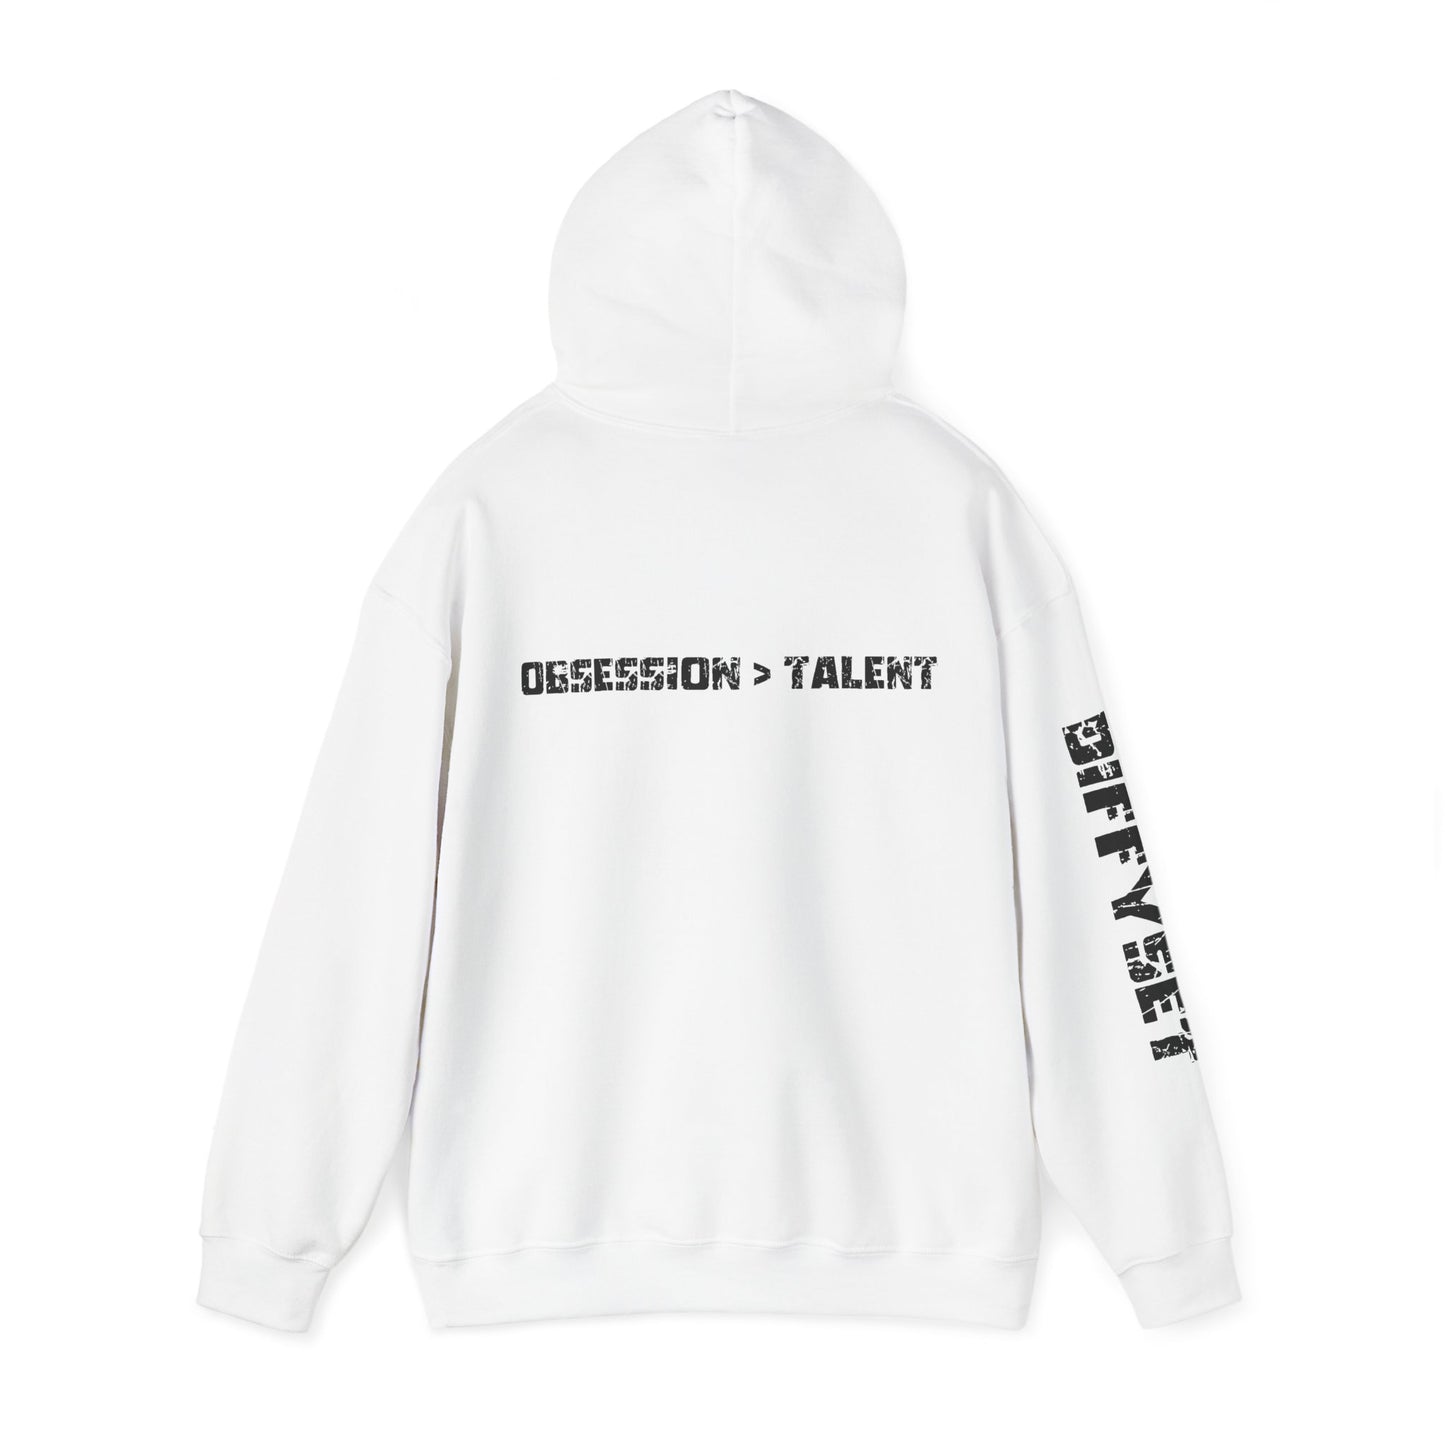 The Obsession Hoodie